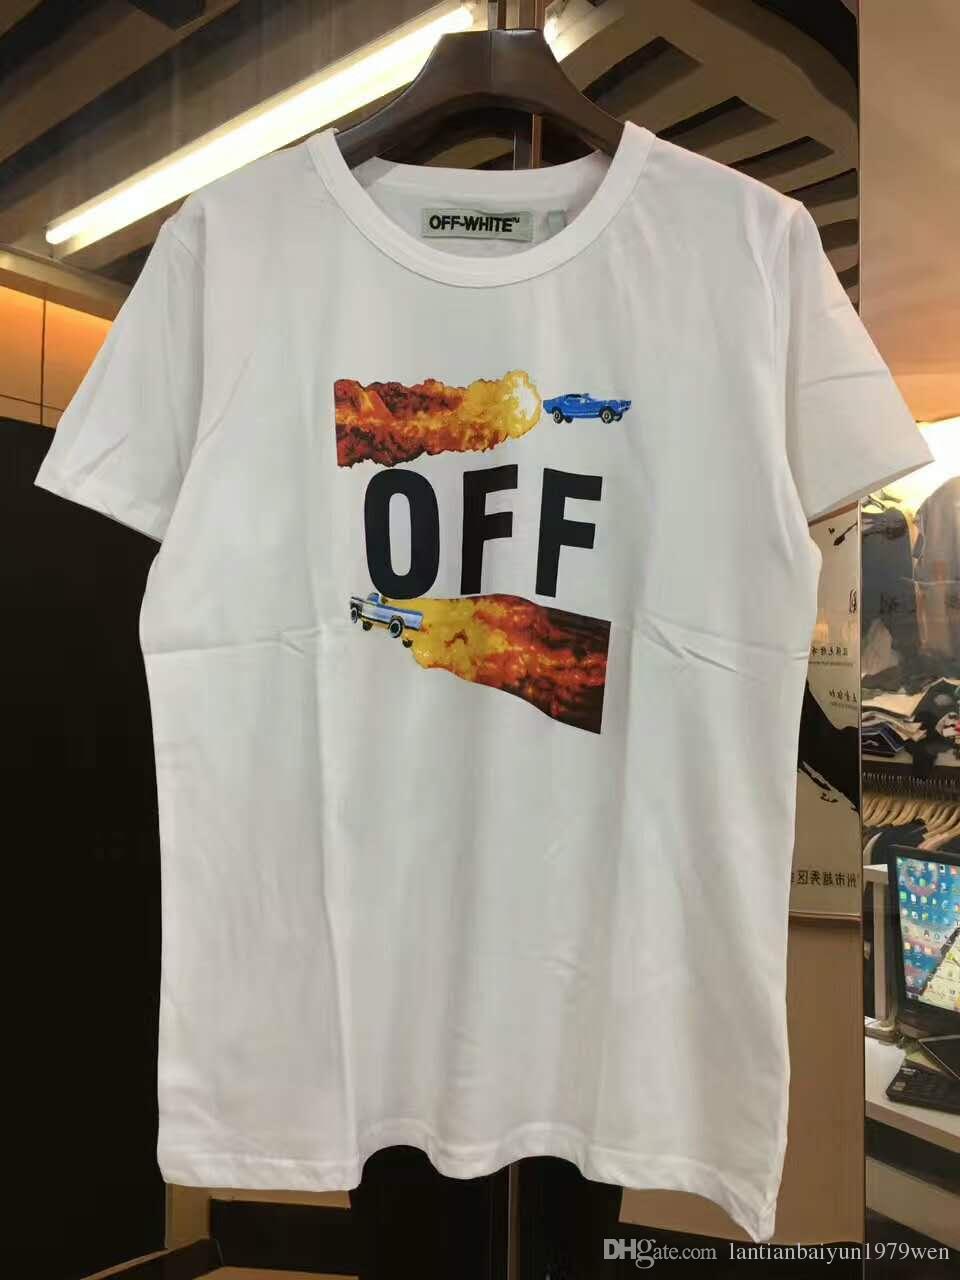 Off White Brand Flame Logo - Ew Brand OFF WHITE Back Twill Colorful Spitfire Car Flame Men Women ...